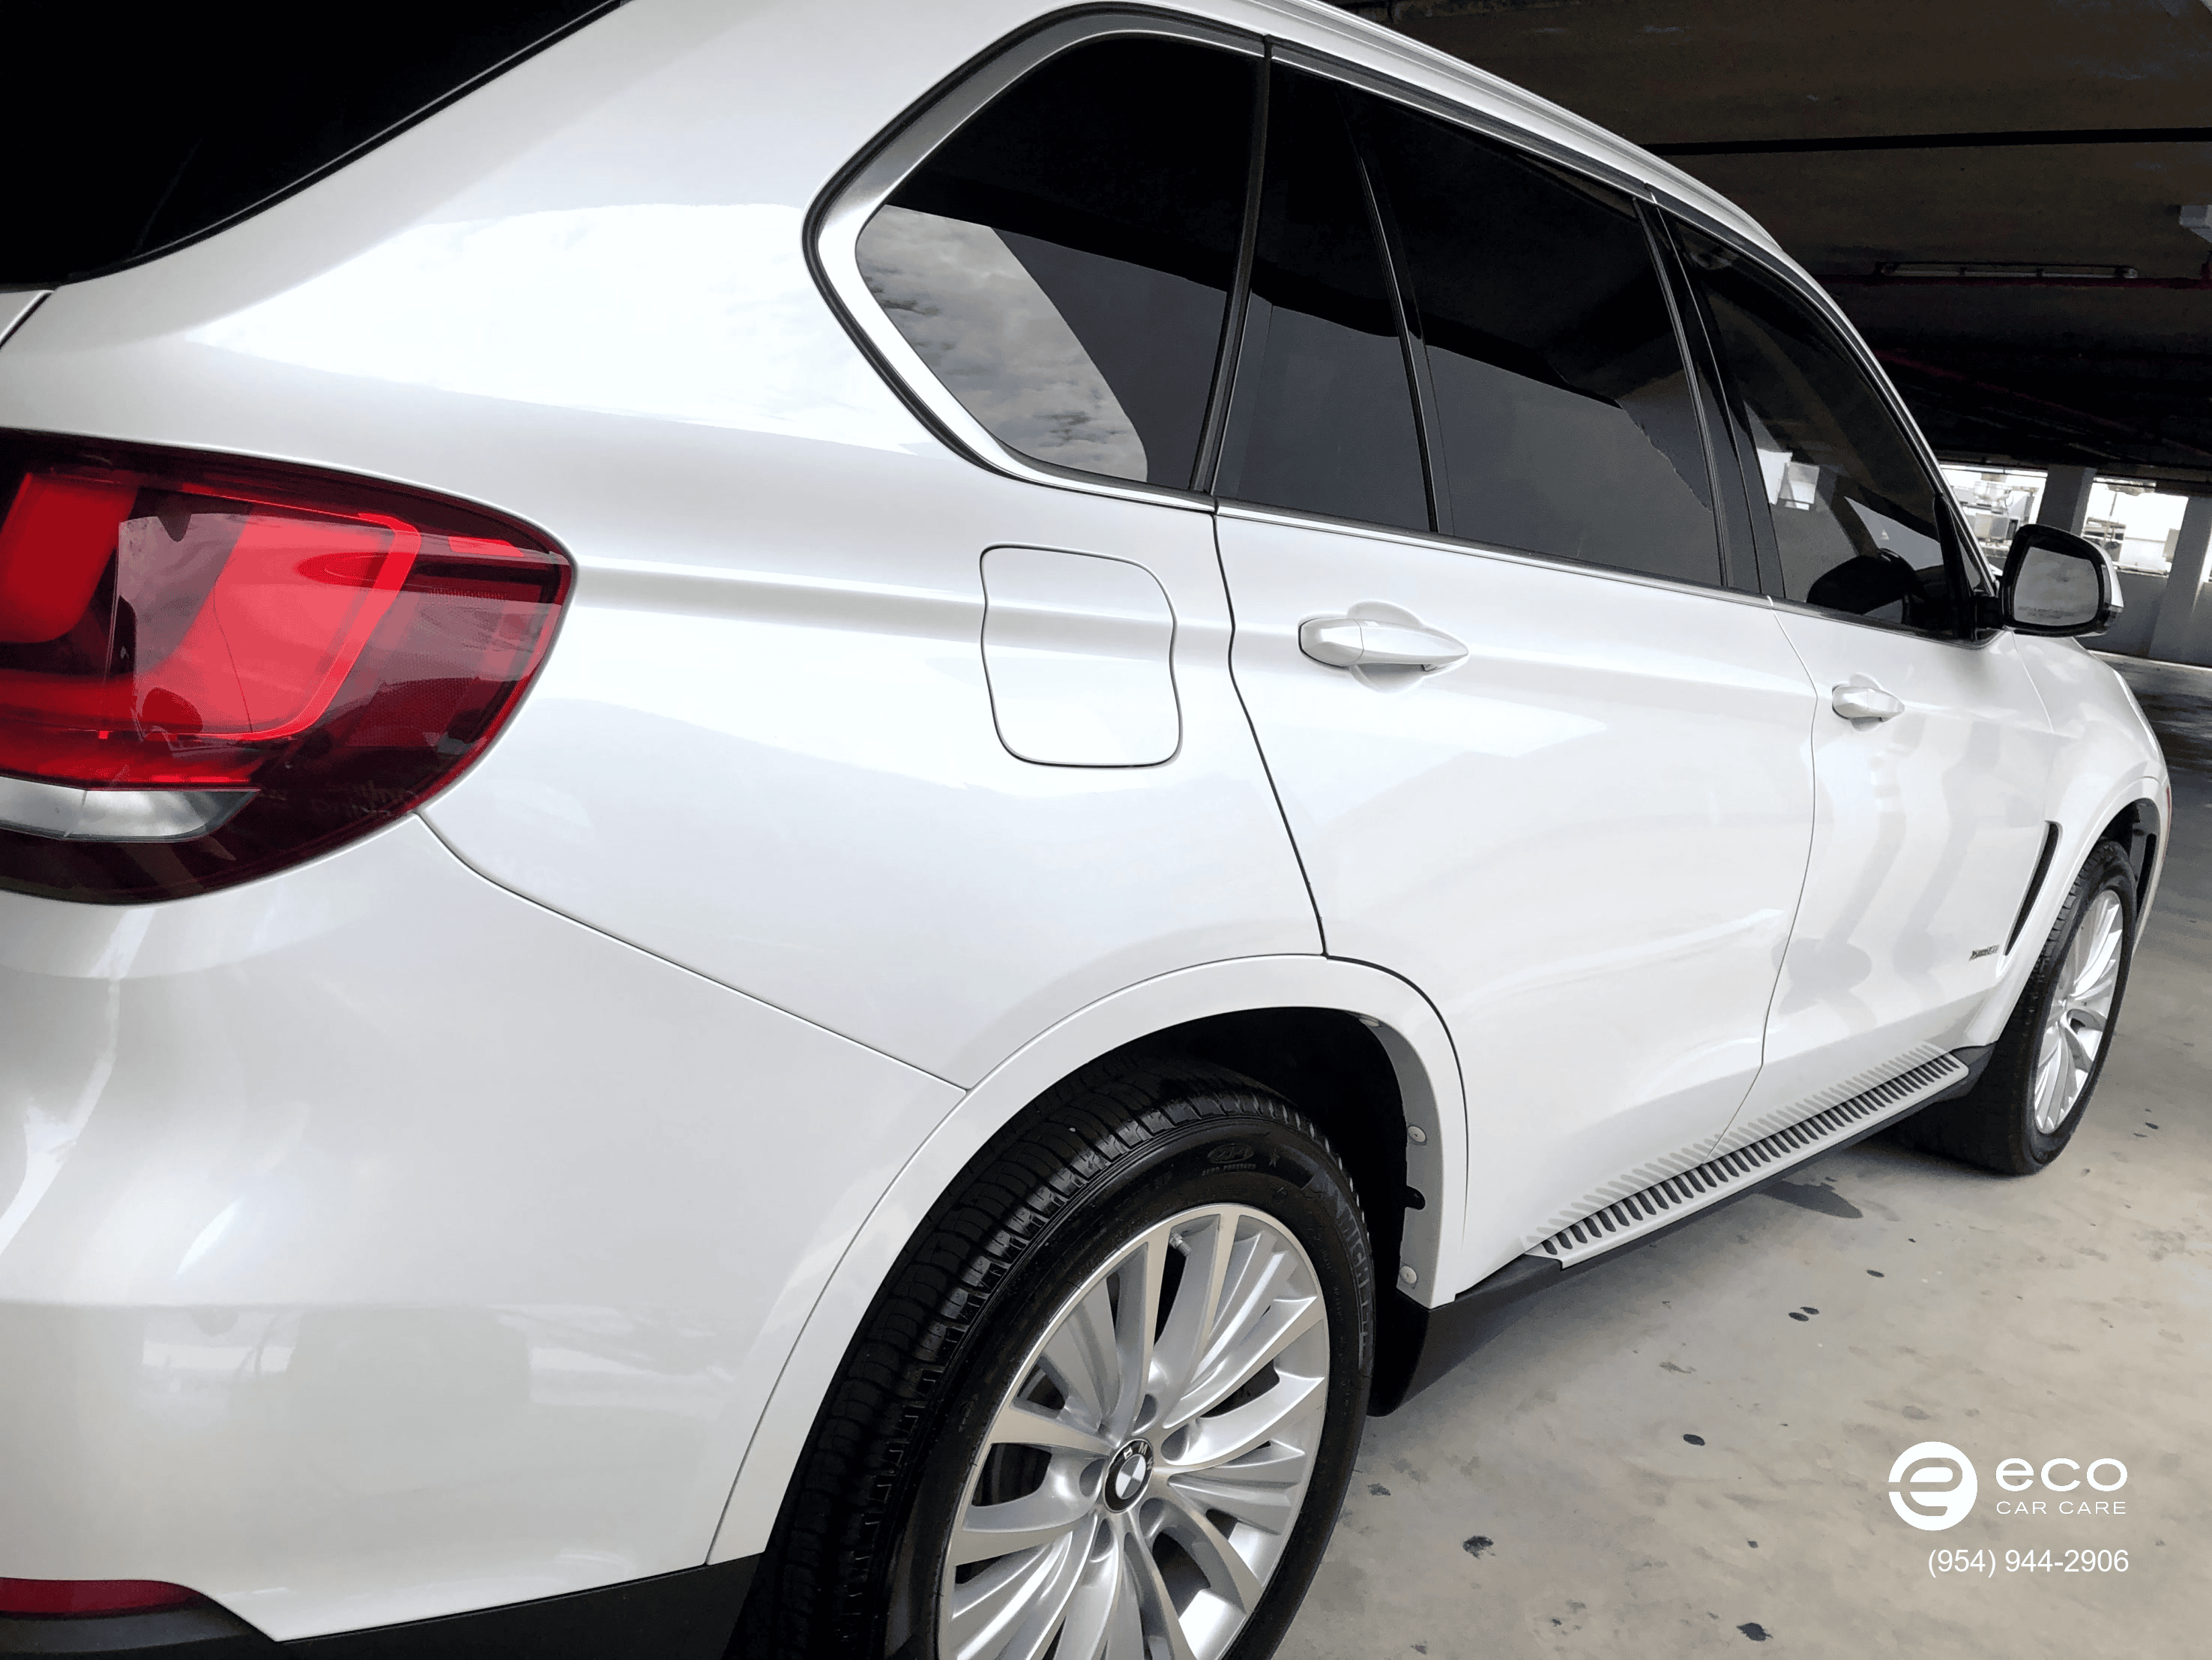 window tinting carbon film for suvs 2 front windows